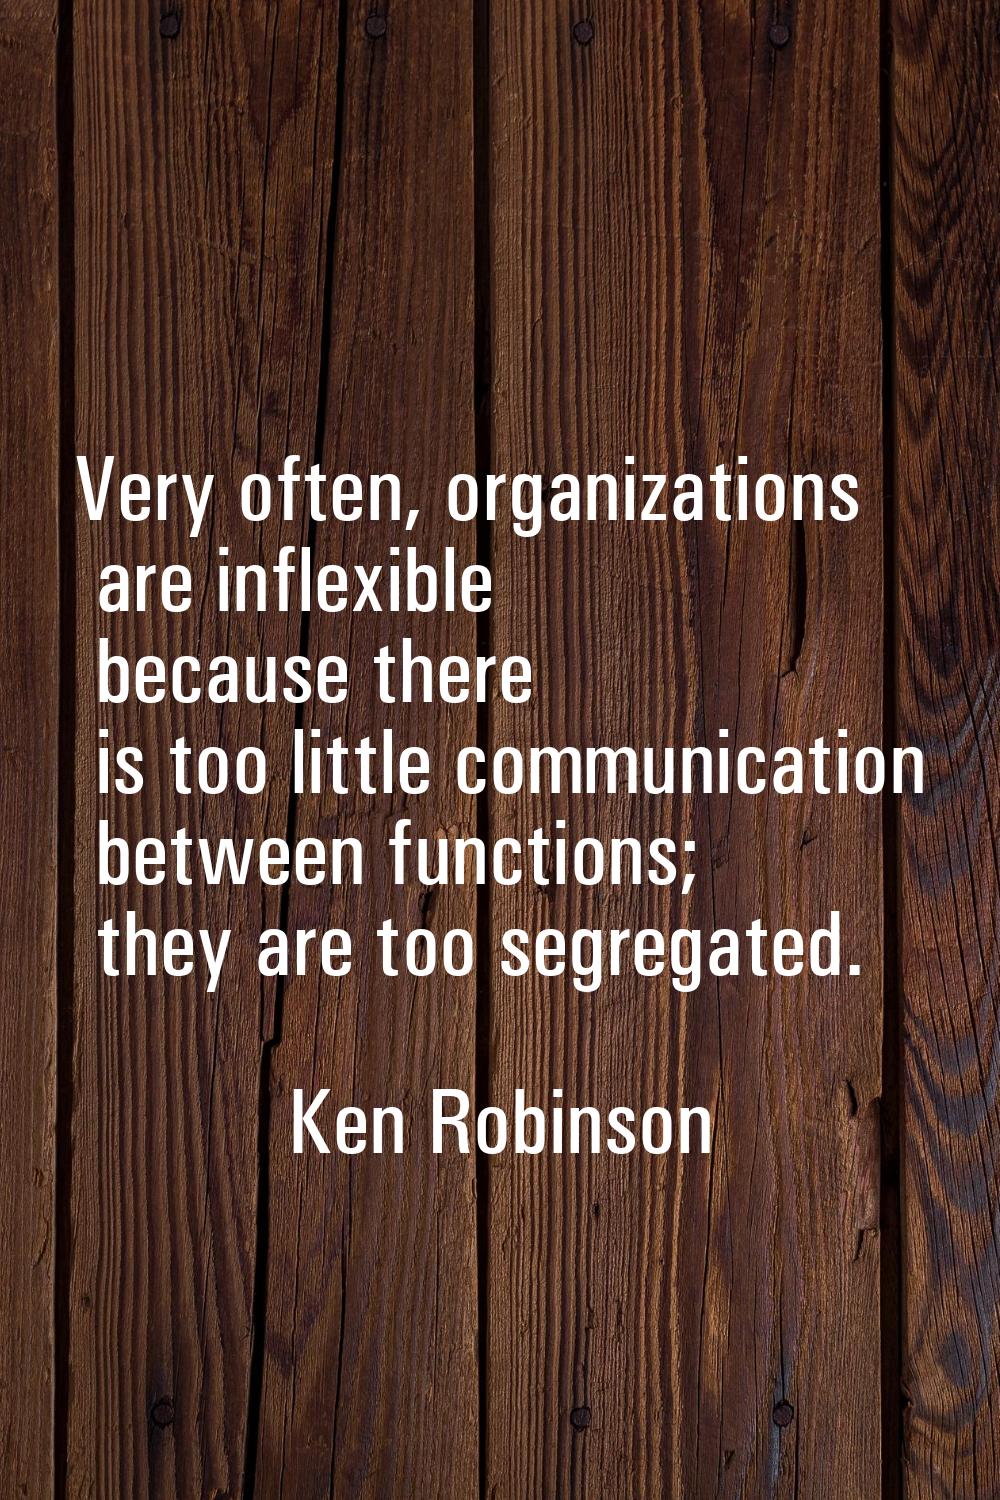 Very often, organizations are inflexible because there is too little communication between function